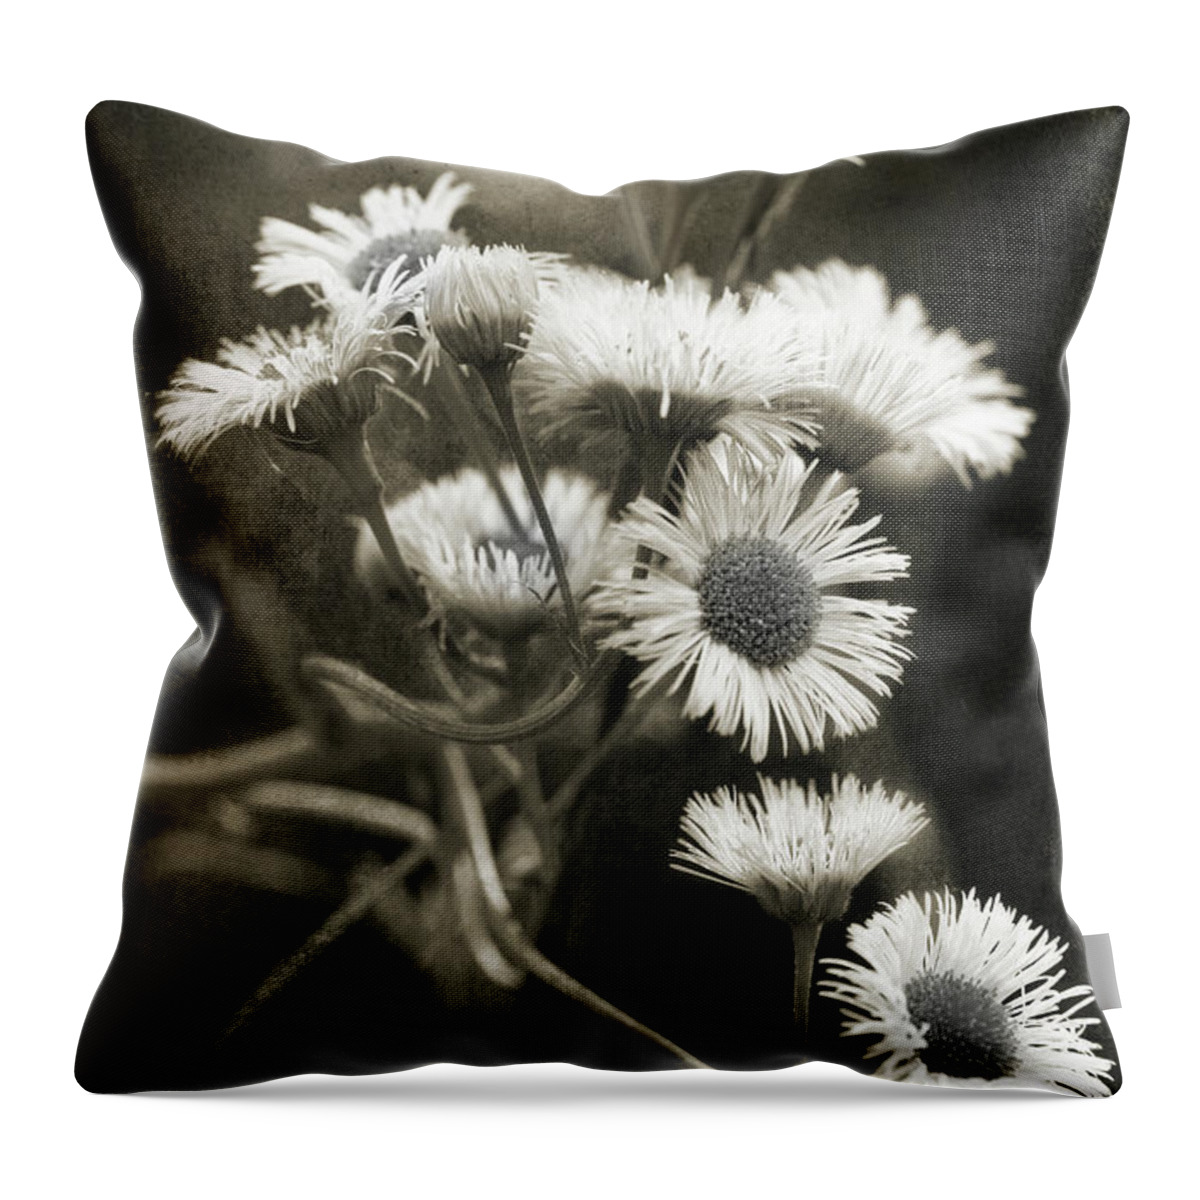 Philadelphia Fleabane Throw Pillow featuring the photograph Morning Vision 2 by Mike Eingle